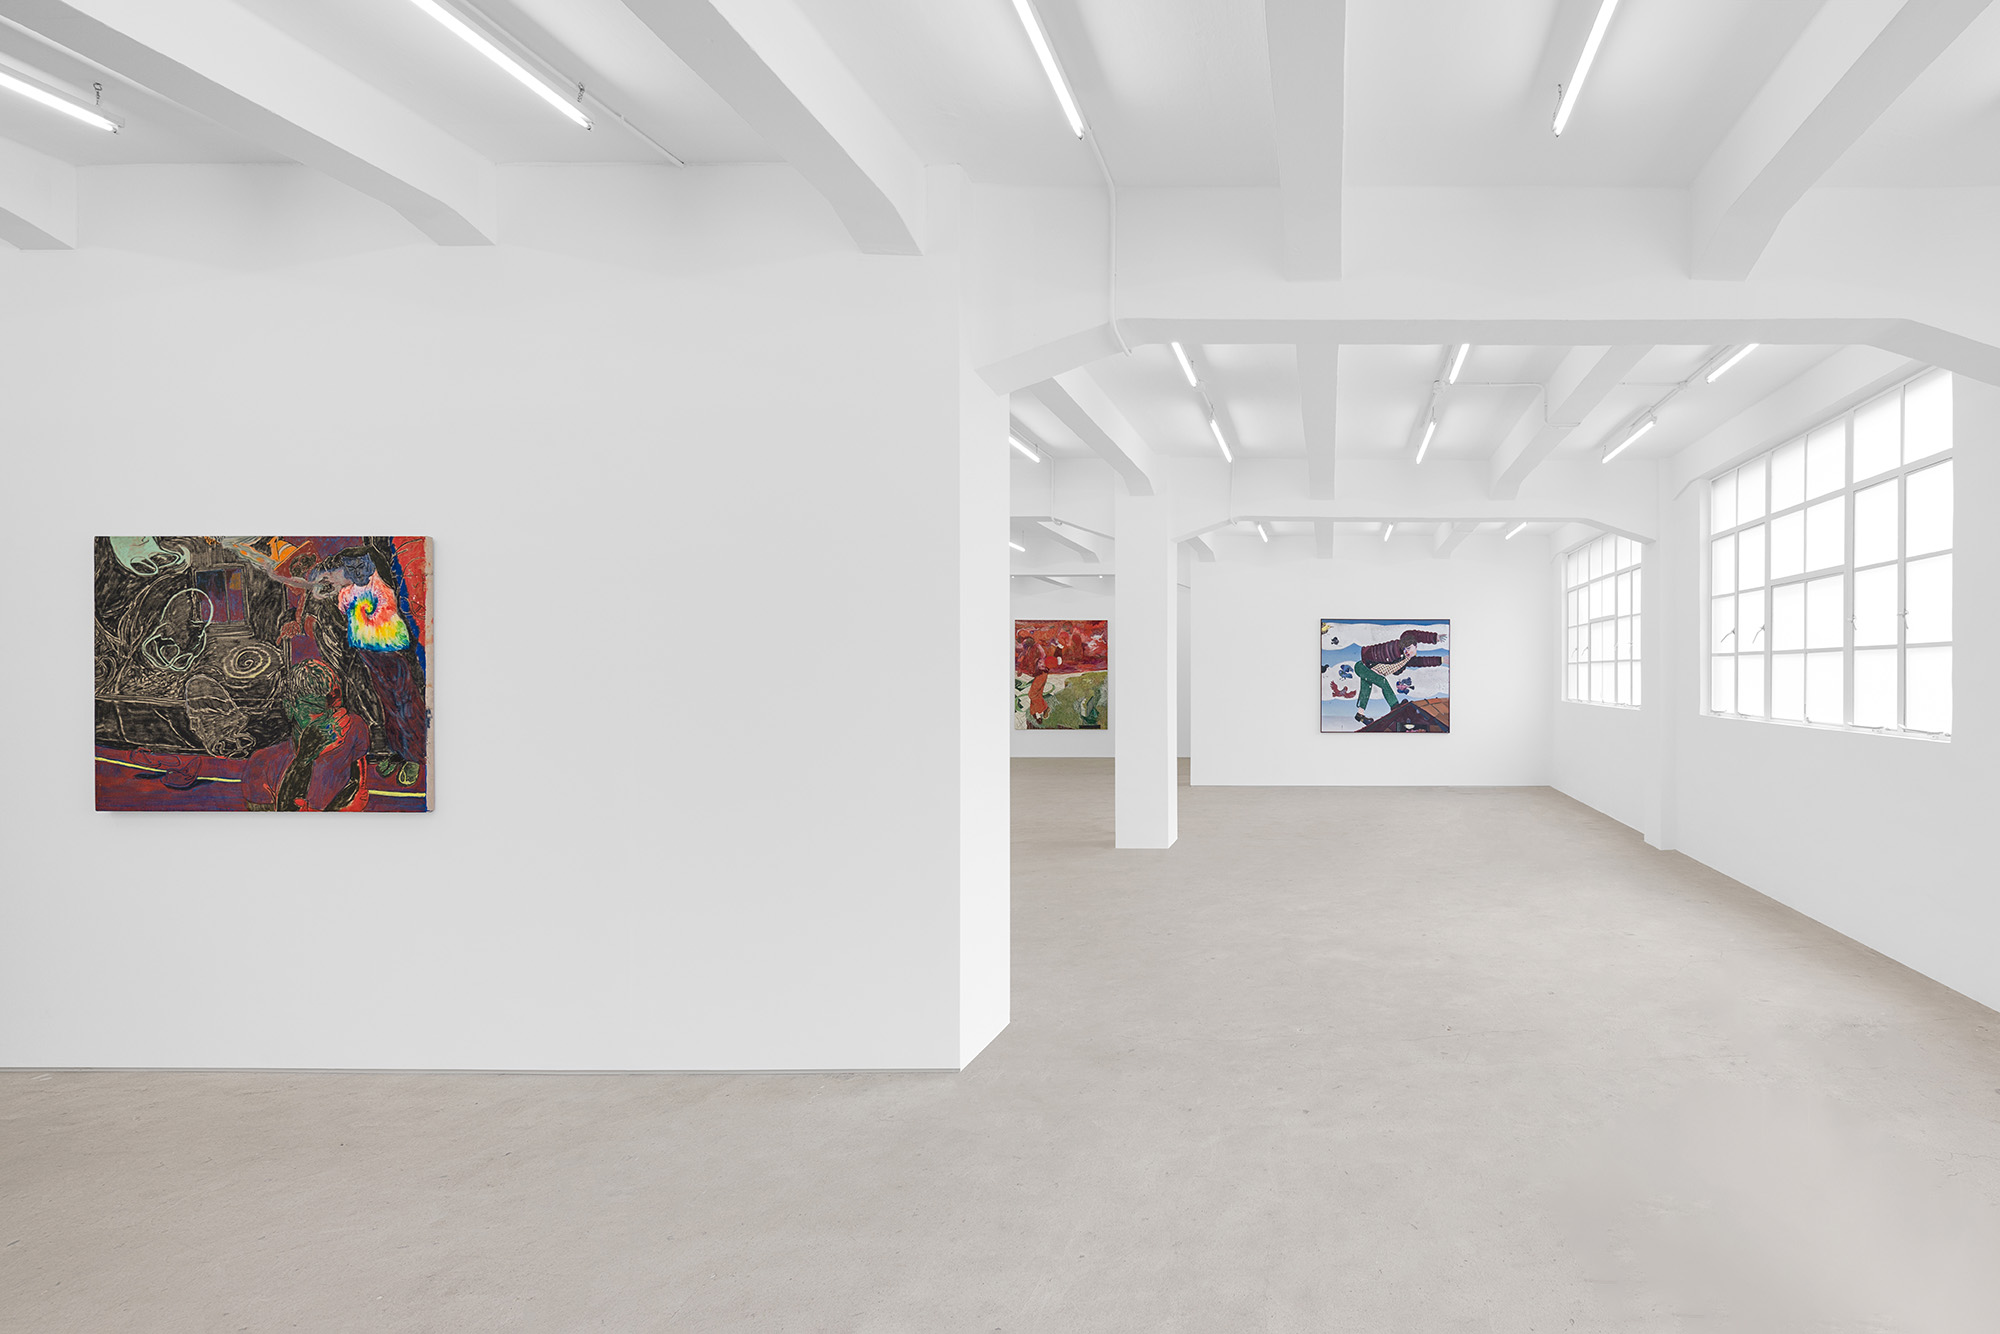 Installation view of group exhibition, Vacation II, at Gallery Vacancy, featuring works by Henry Curchod and Pieter Jennes.